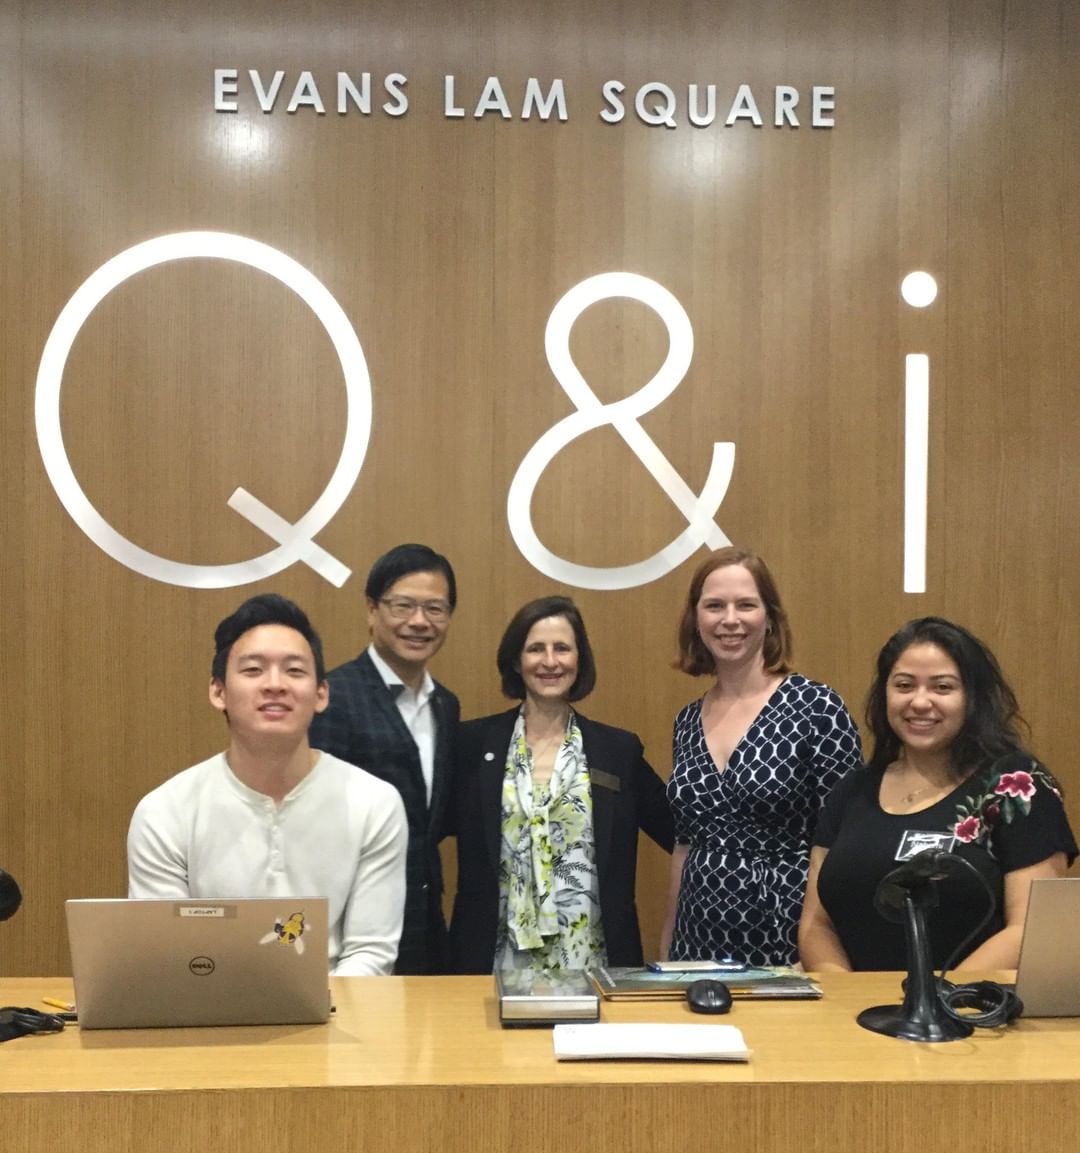 Q&i desk with Evan Lam, Mary Ann Mavrinac and other staff